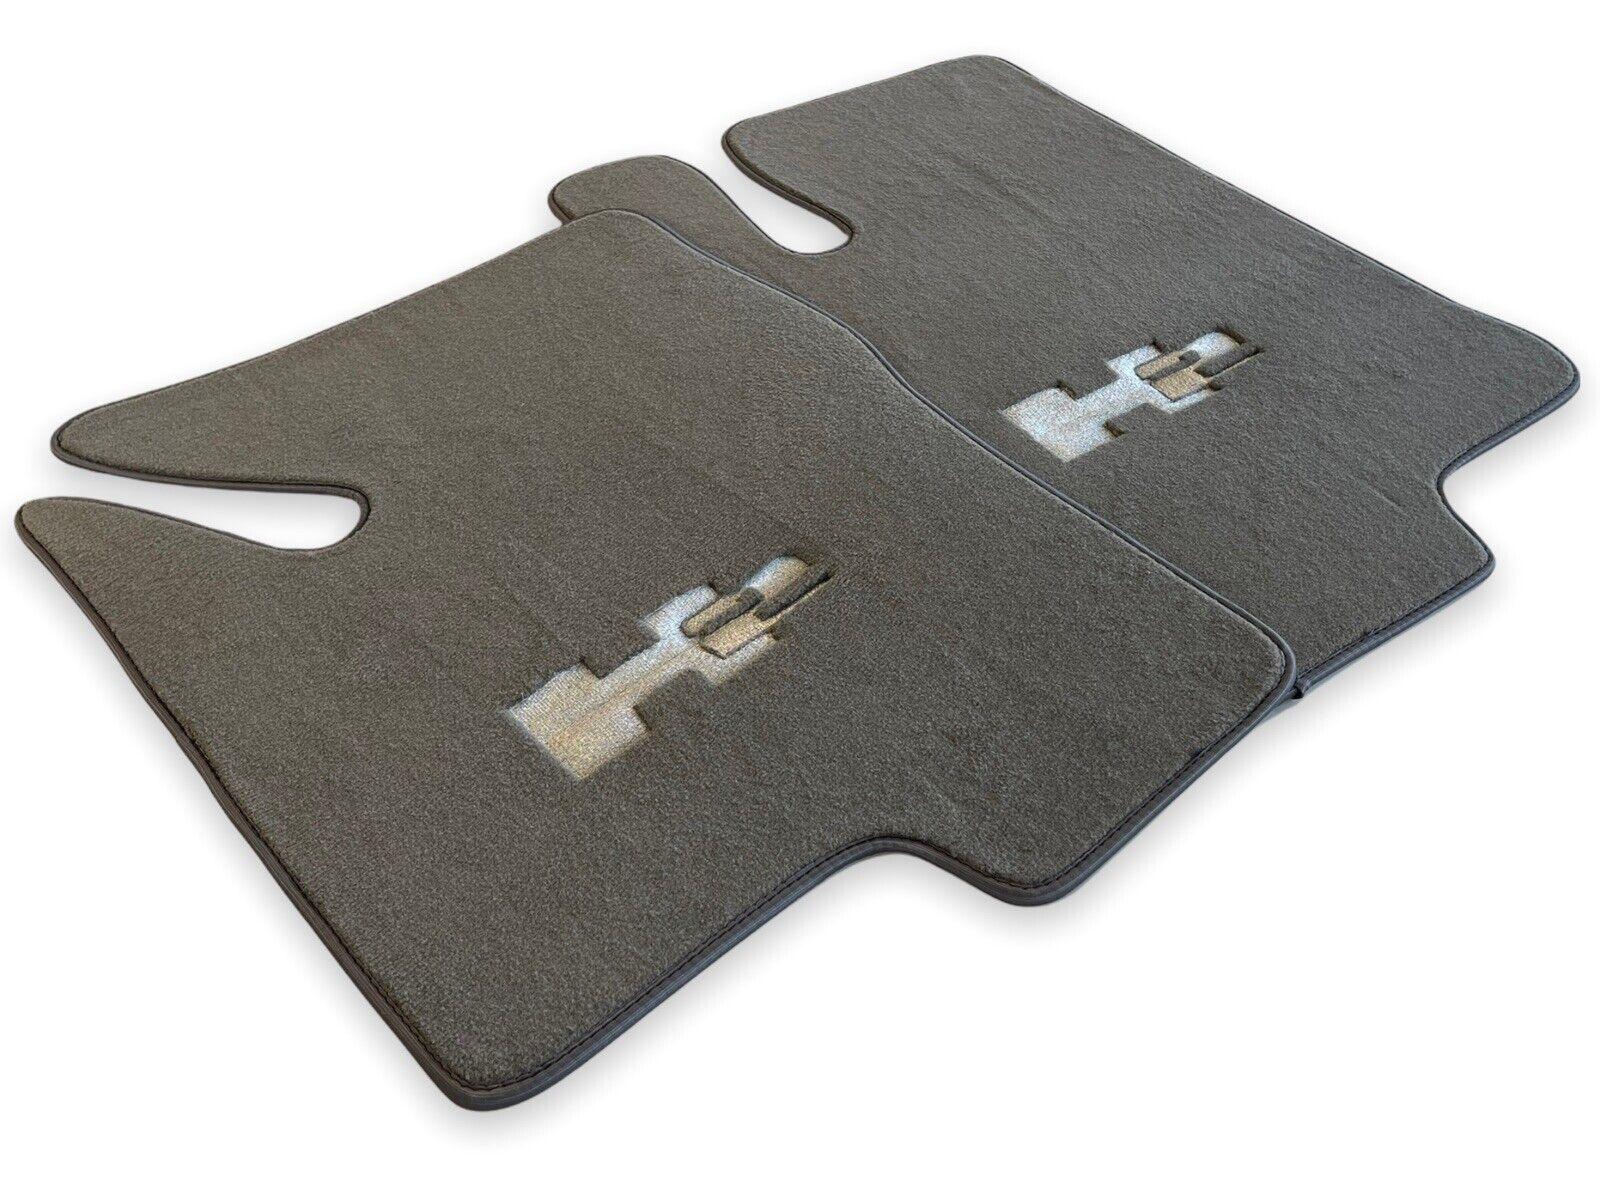 Floor Mats For Hummer H2 2003-2009 Tailored Gray Color Carpets - AutoWin